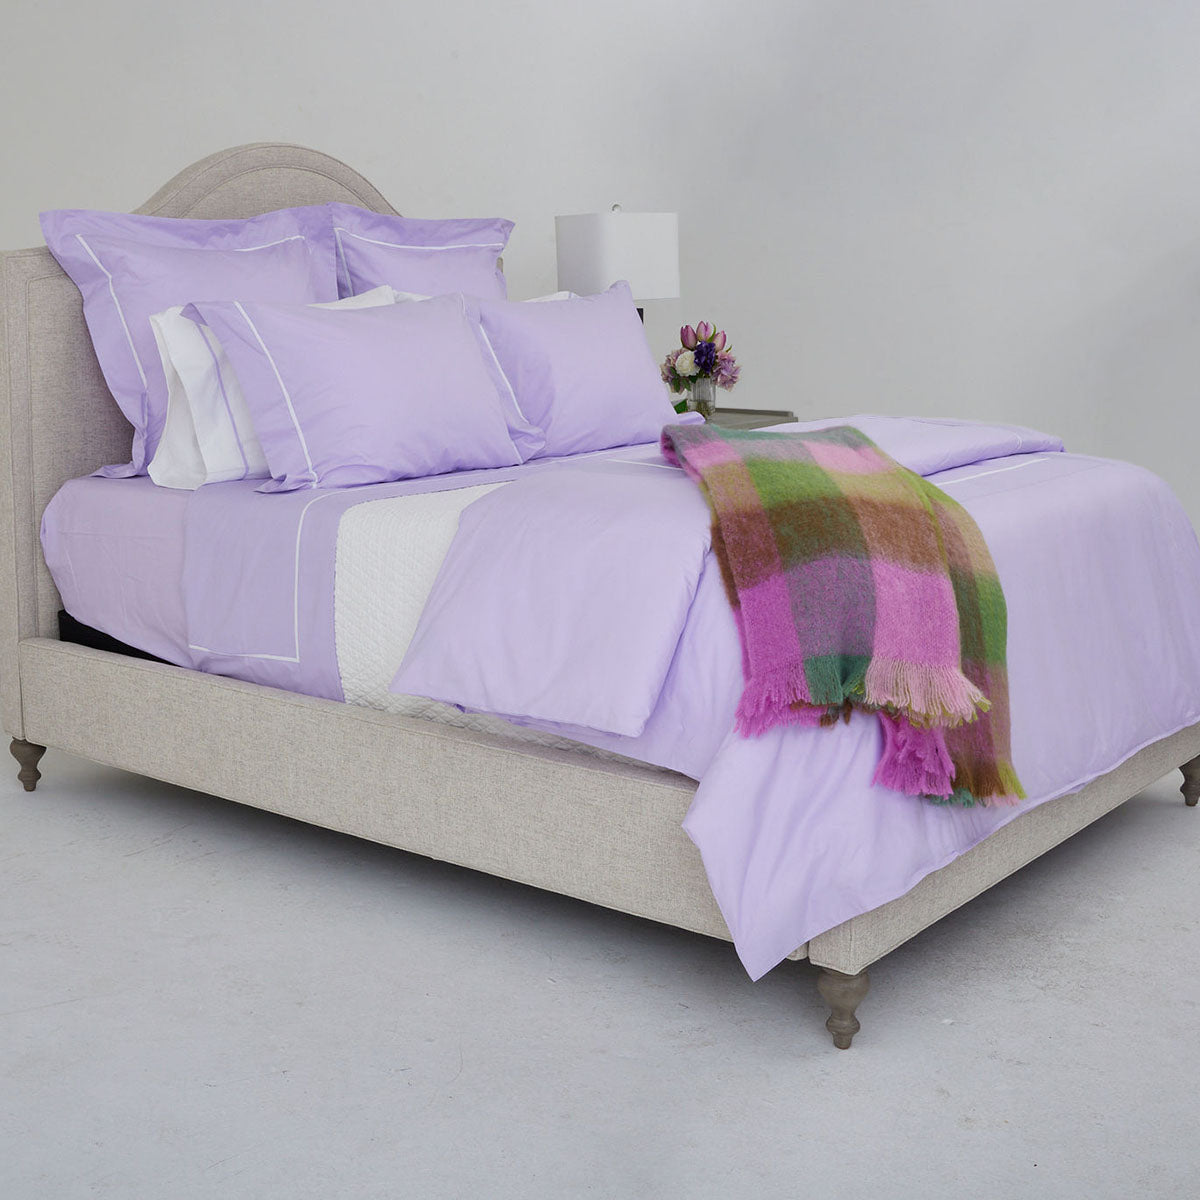 Image of a bed made with the Gracious Home collection bedding set in a light purple